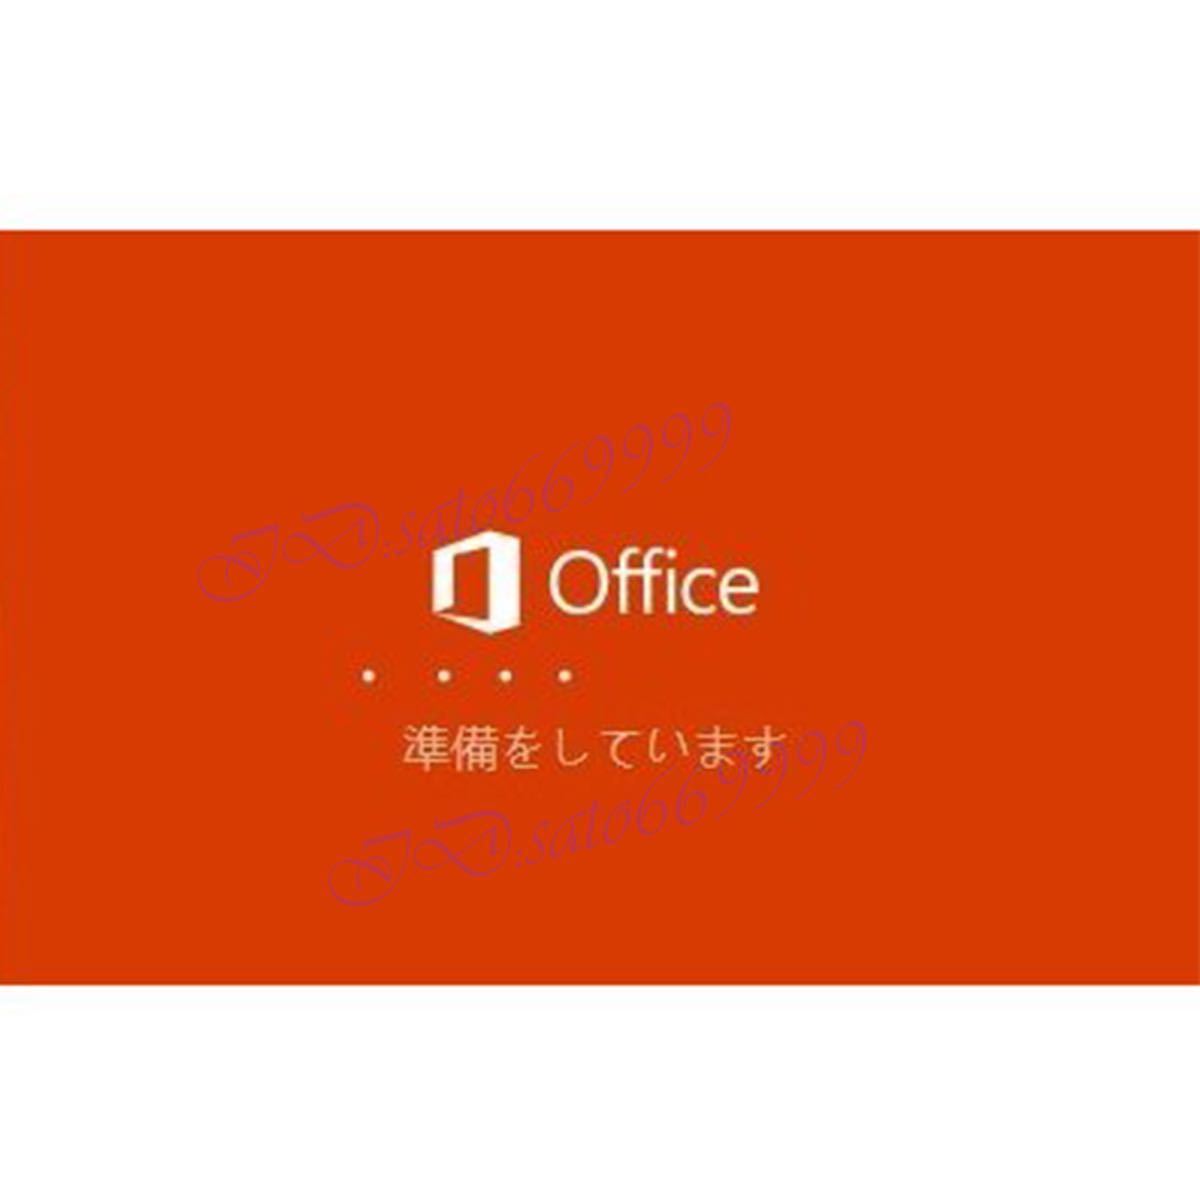 [Office2021 download version ]Microsoft Office 2021 Professional Plus Pro duct key office 2021 certification guarantee procedure document earth 